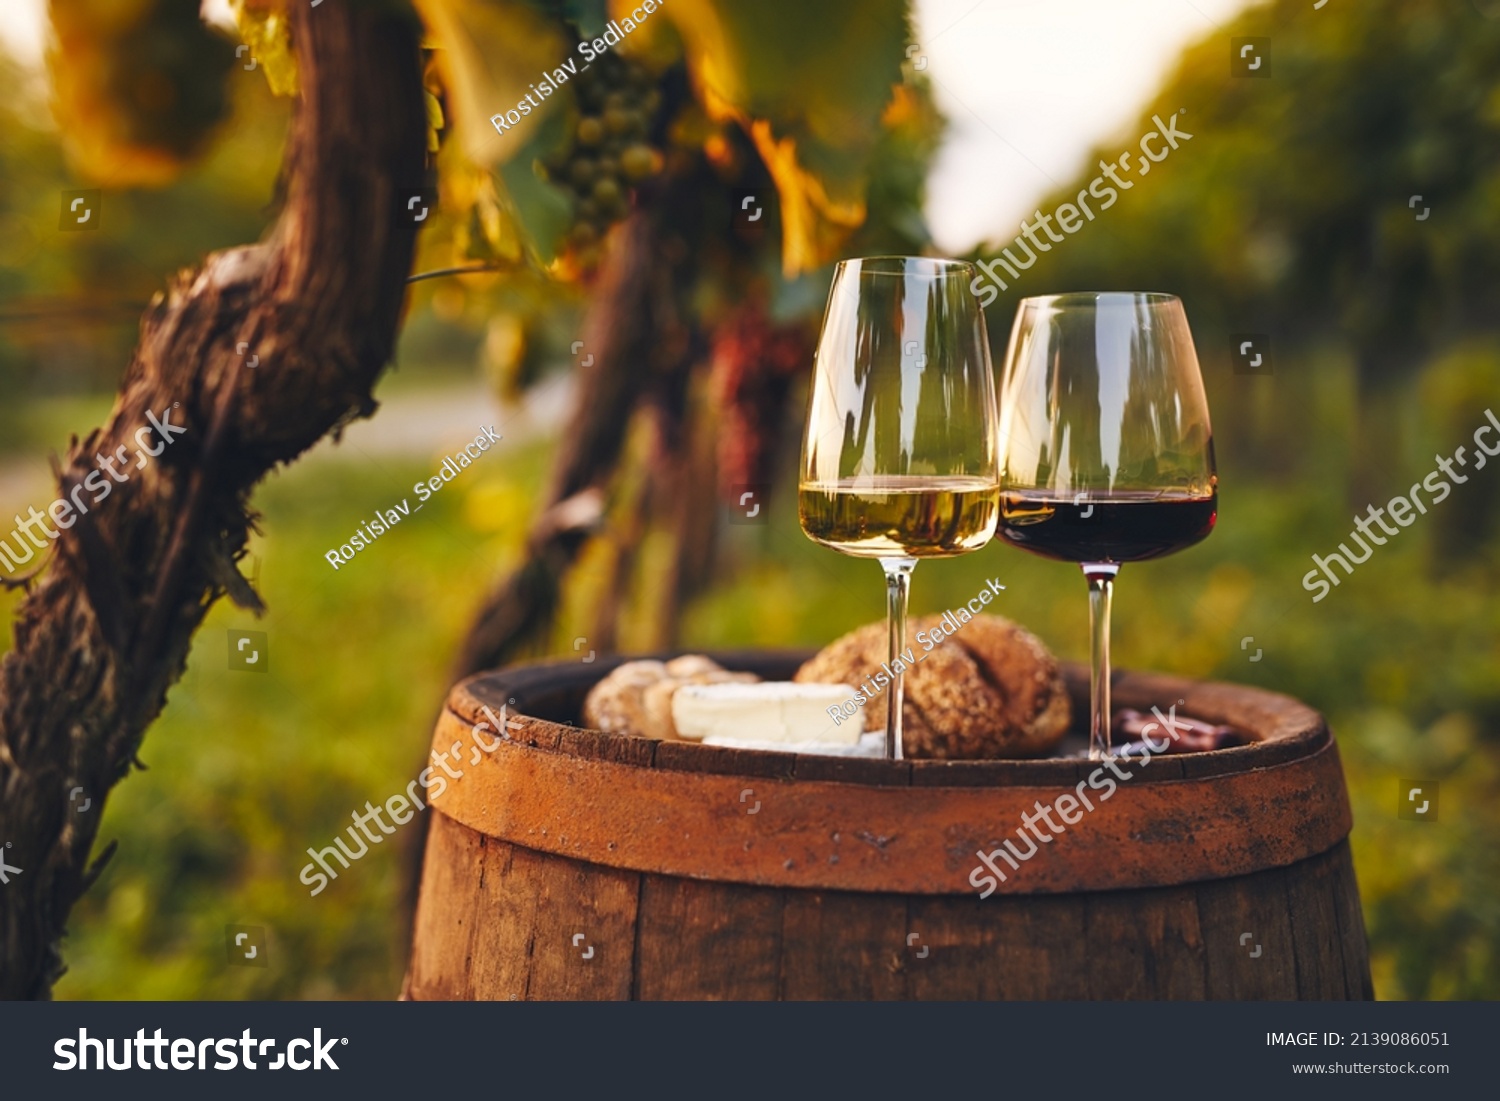 Two glasses of white and red wine on an old barrel outside in the vineyard #2139086051